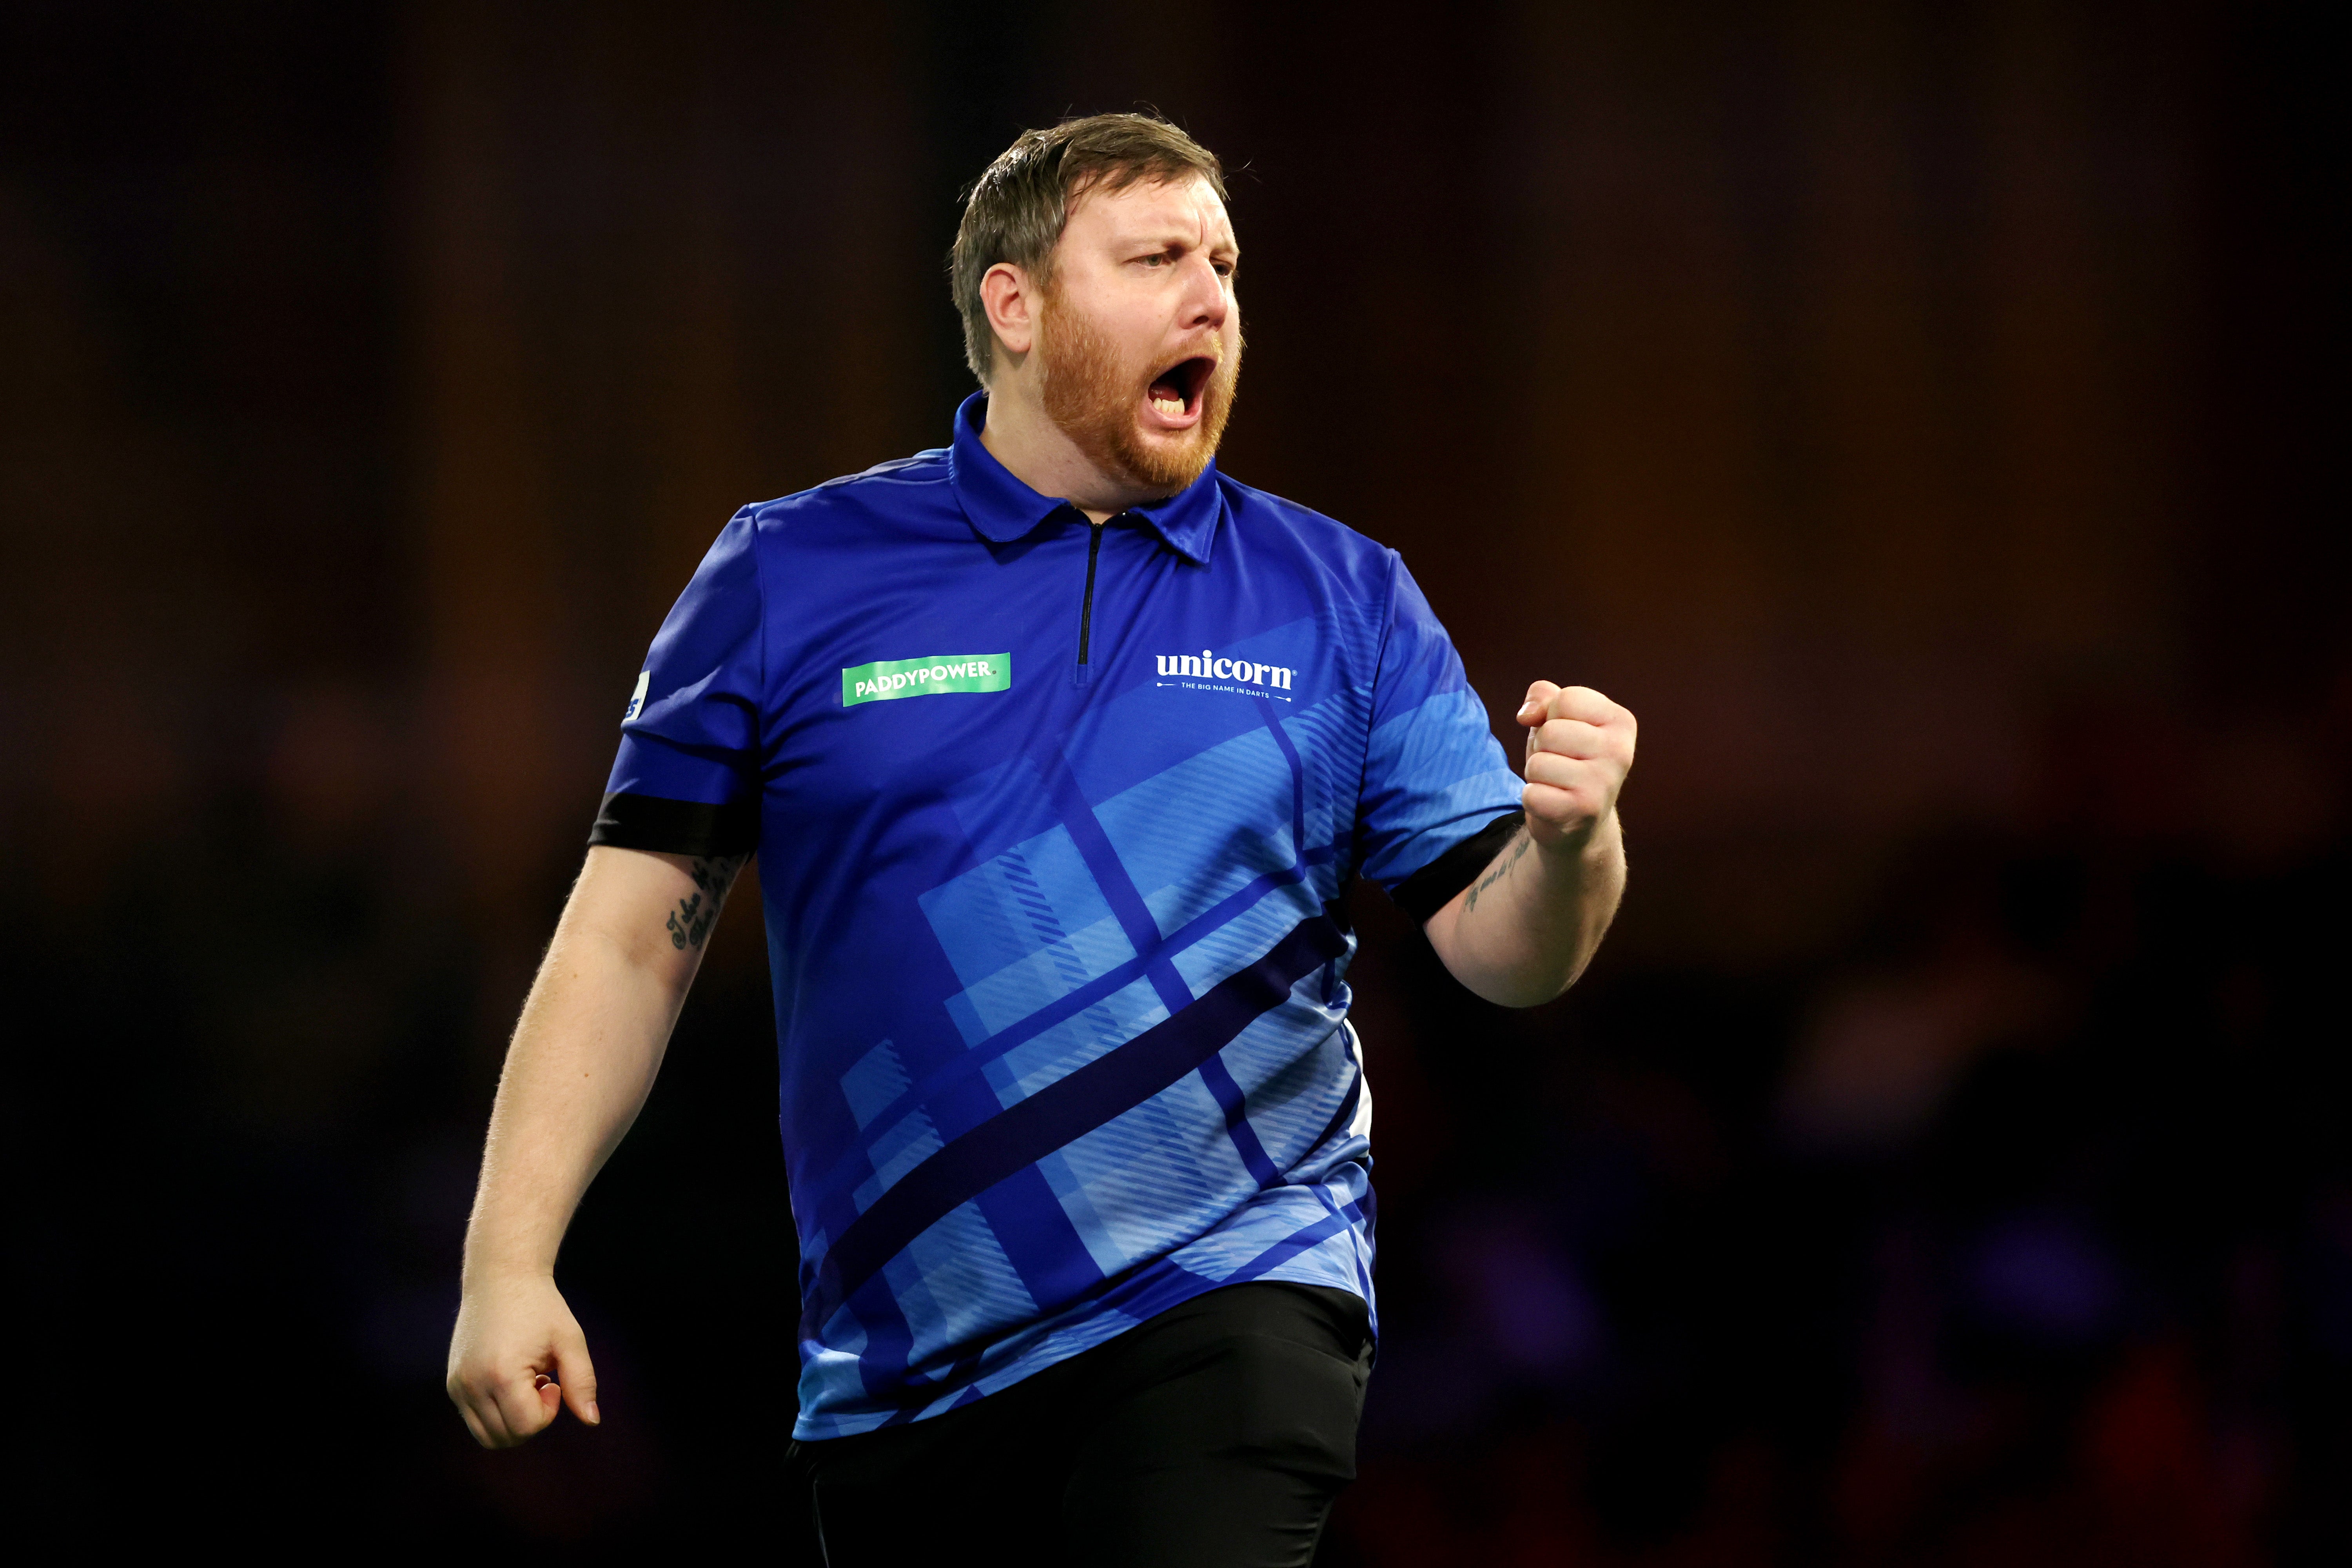 Scotland’s Cameron Menzies won his first-round match at Ally Pally